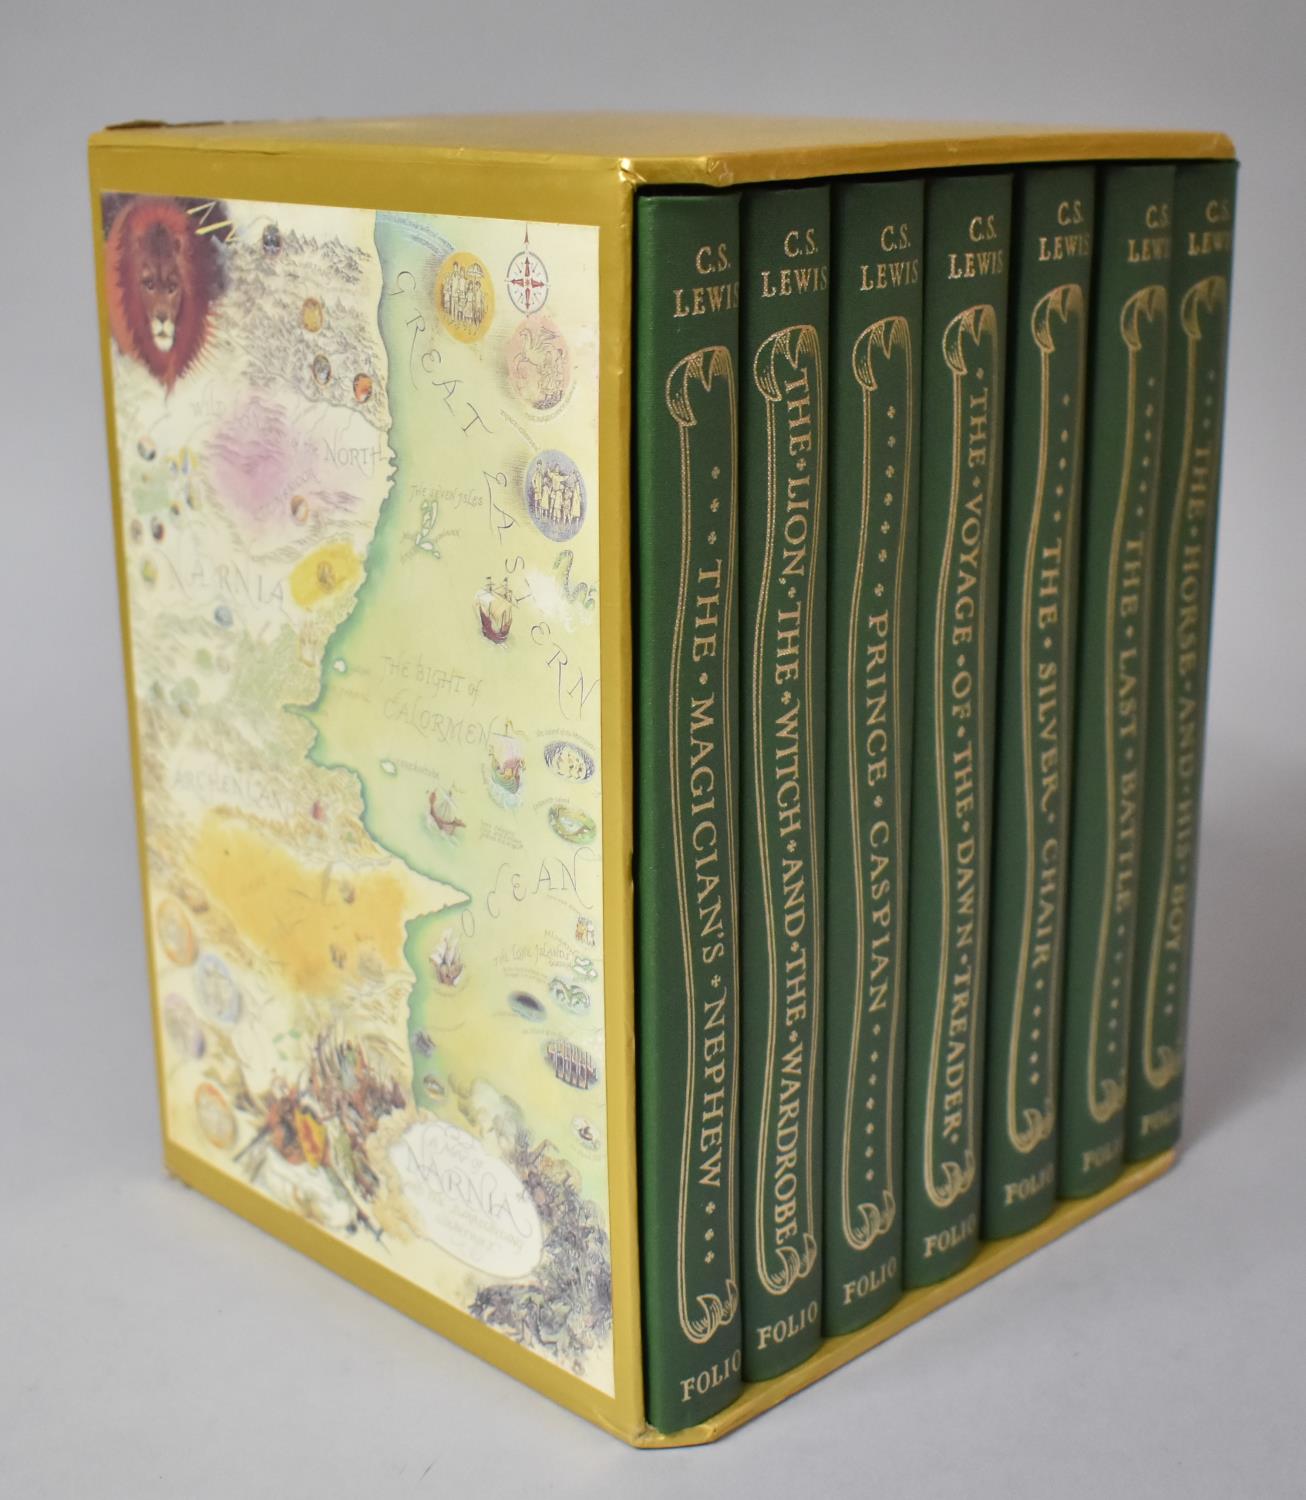 A Cased Set of Seven Folio Society Books, The Chronicles of Narnia by C.S Lewis